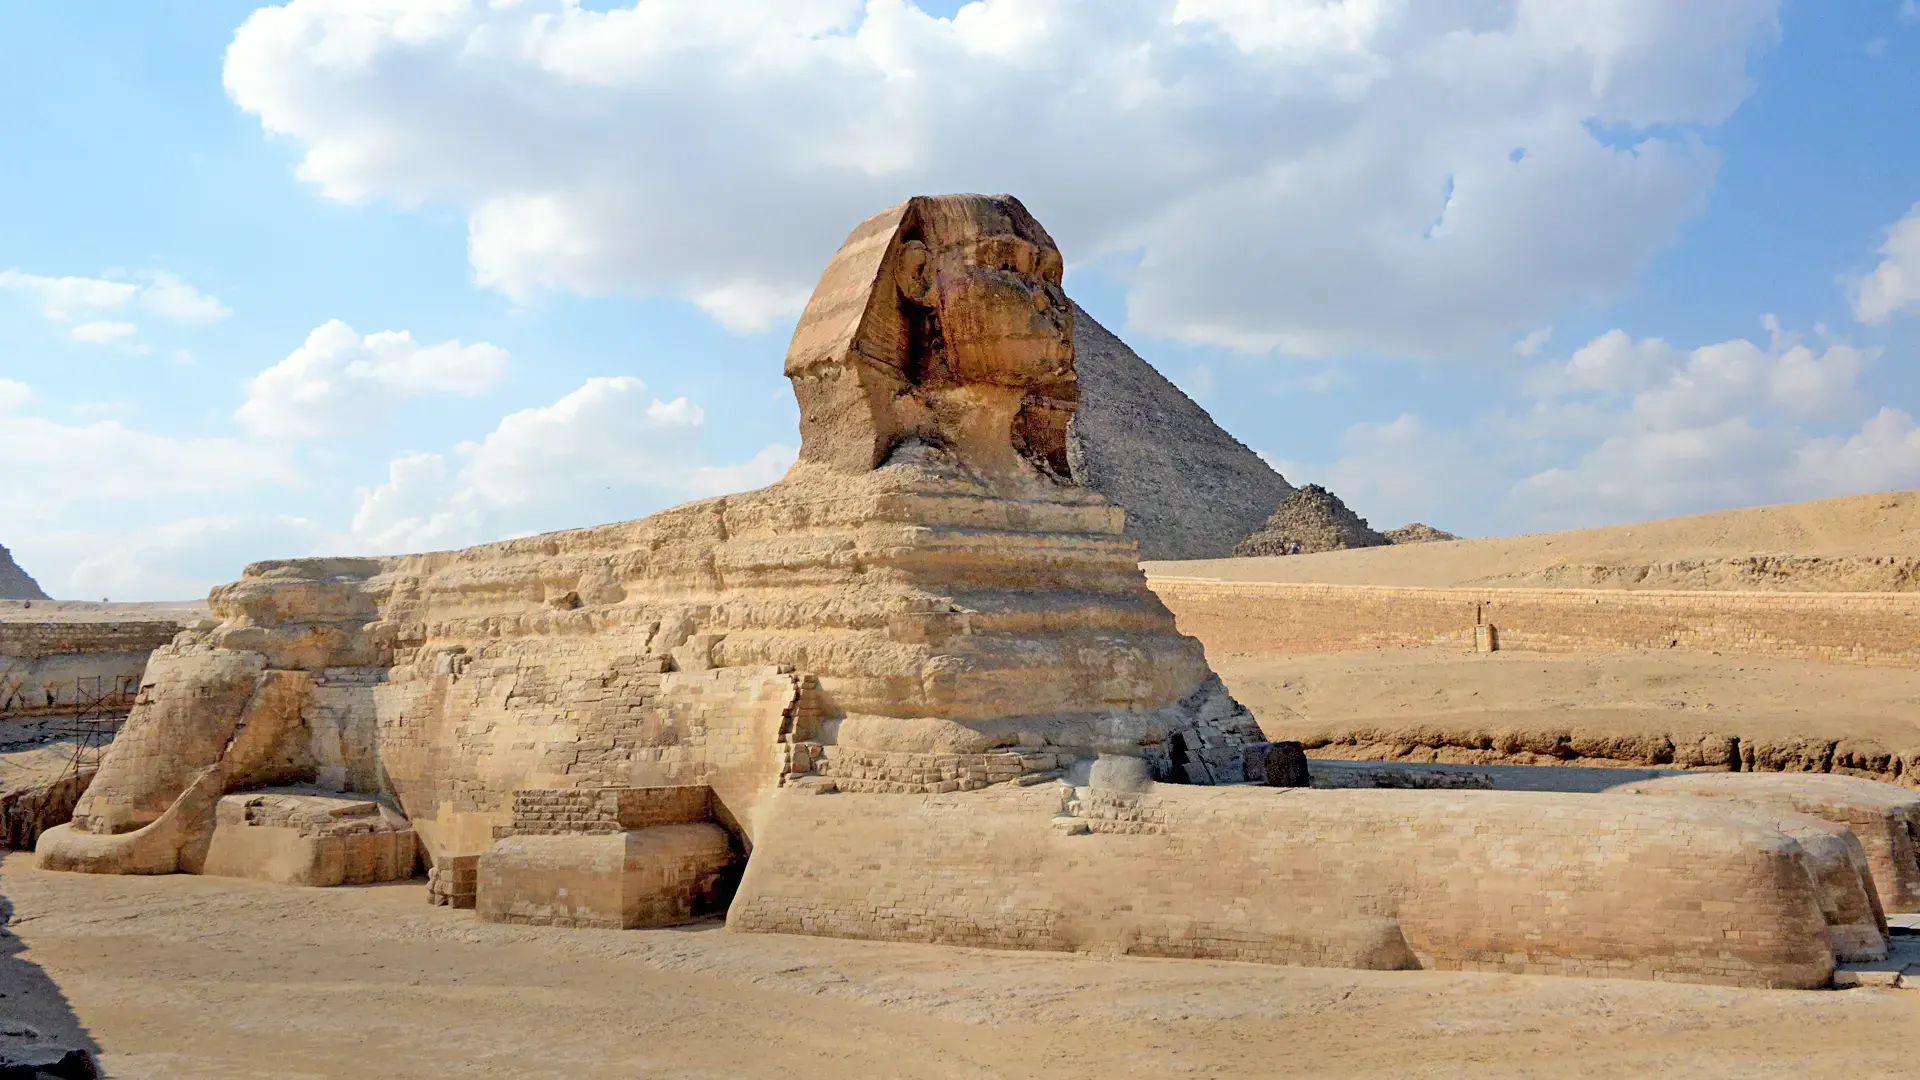 The Great Sphinx